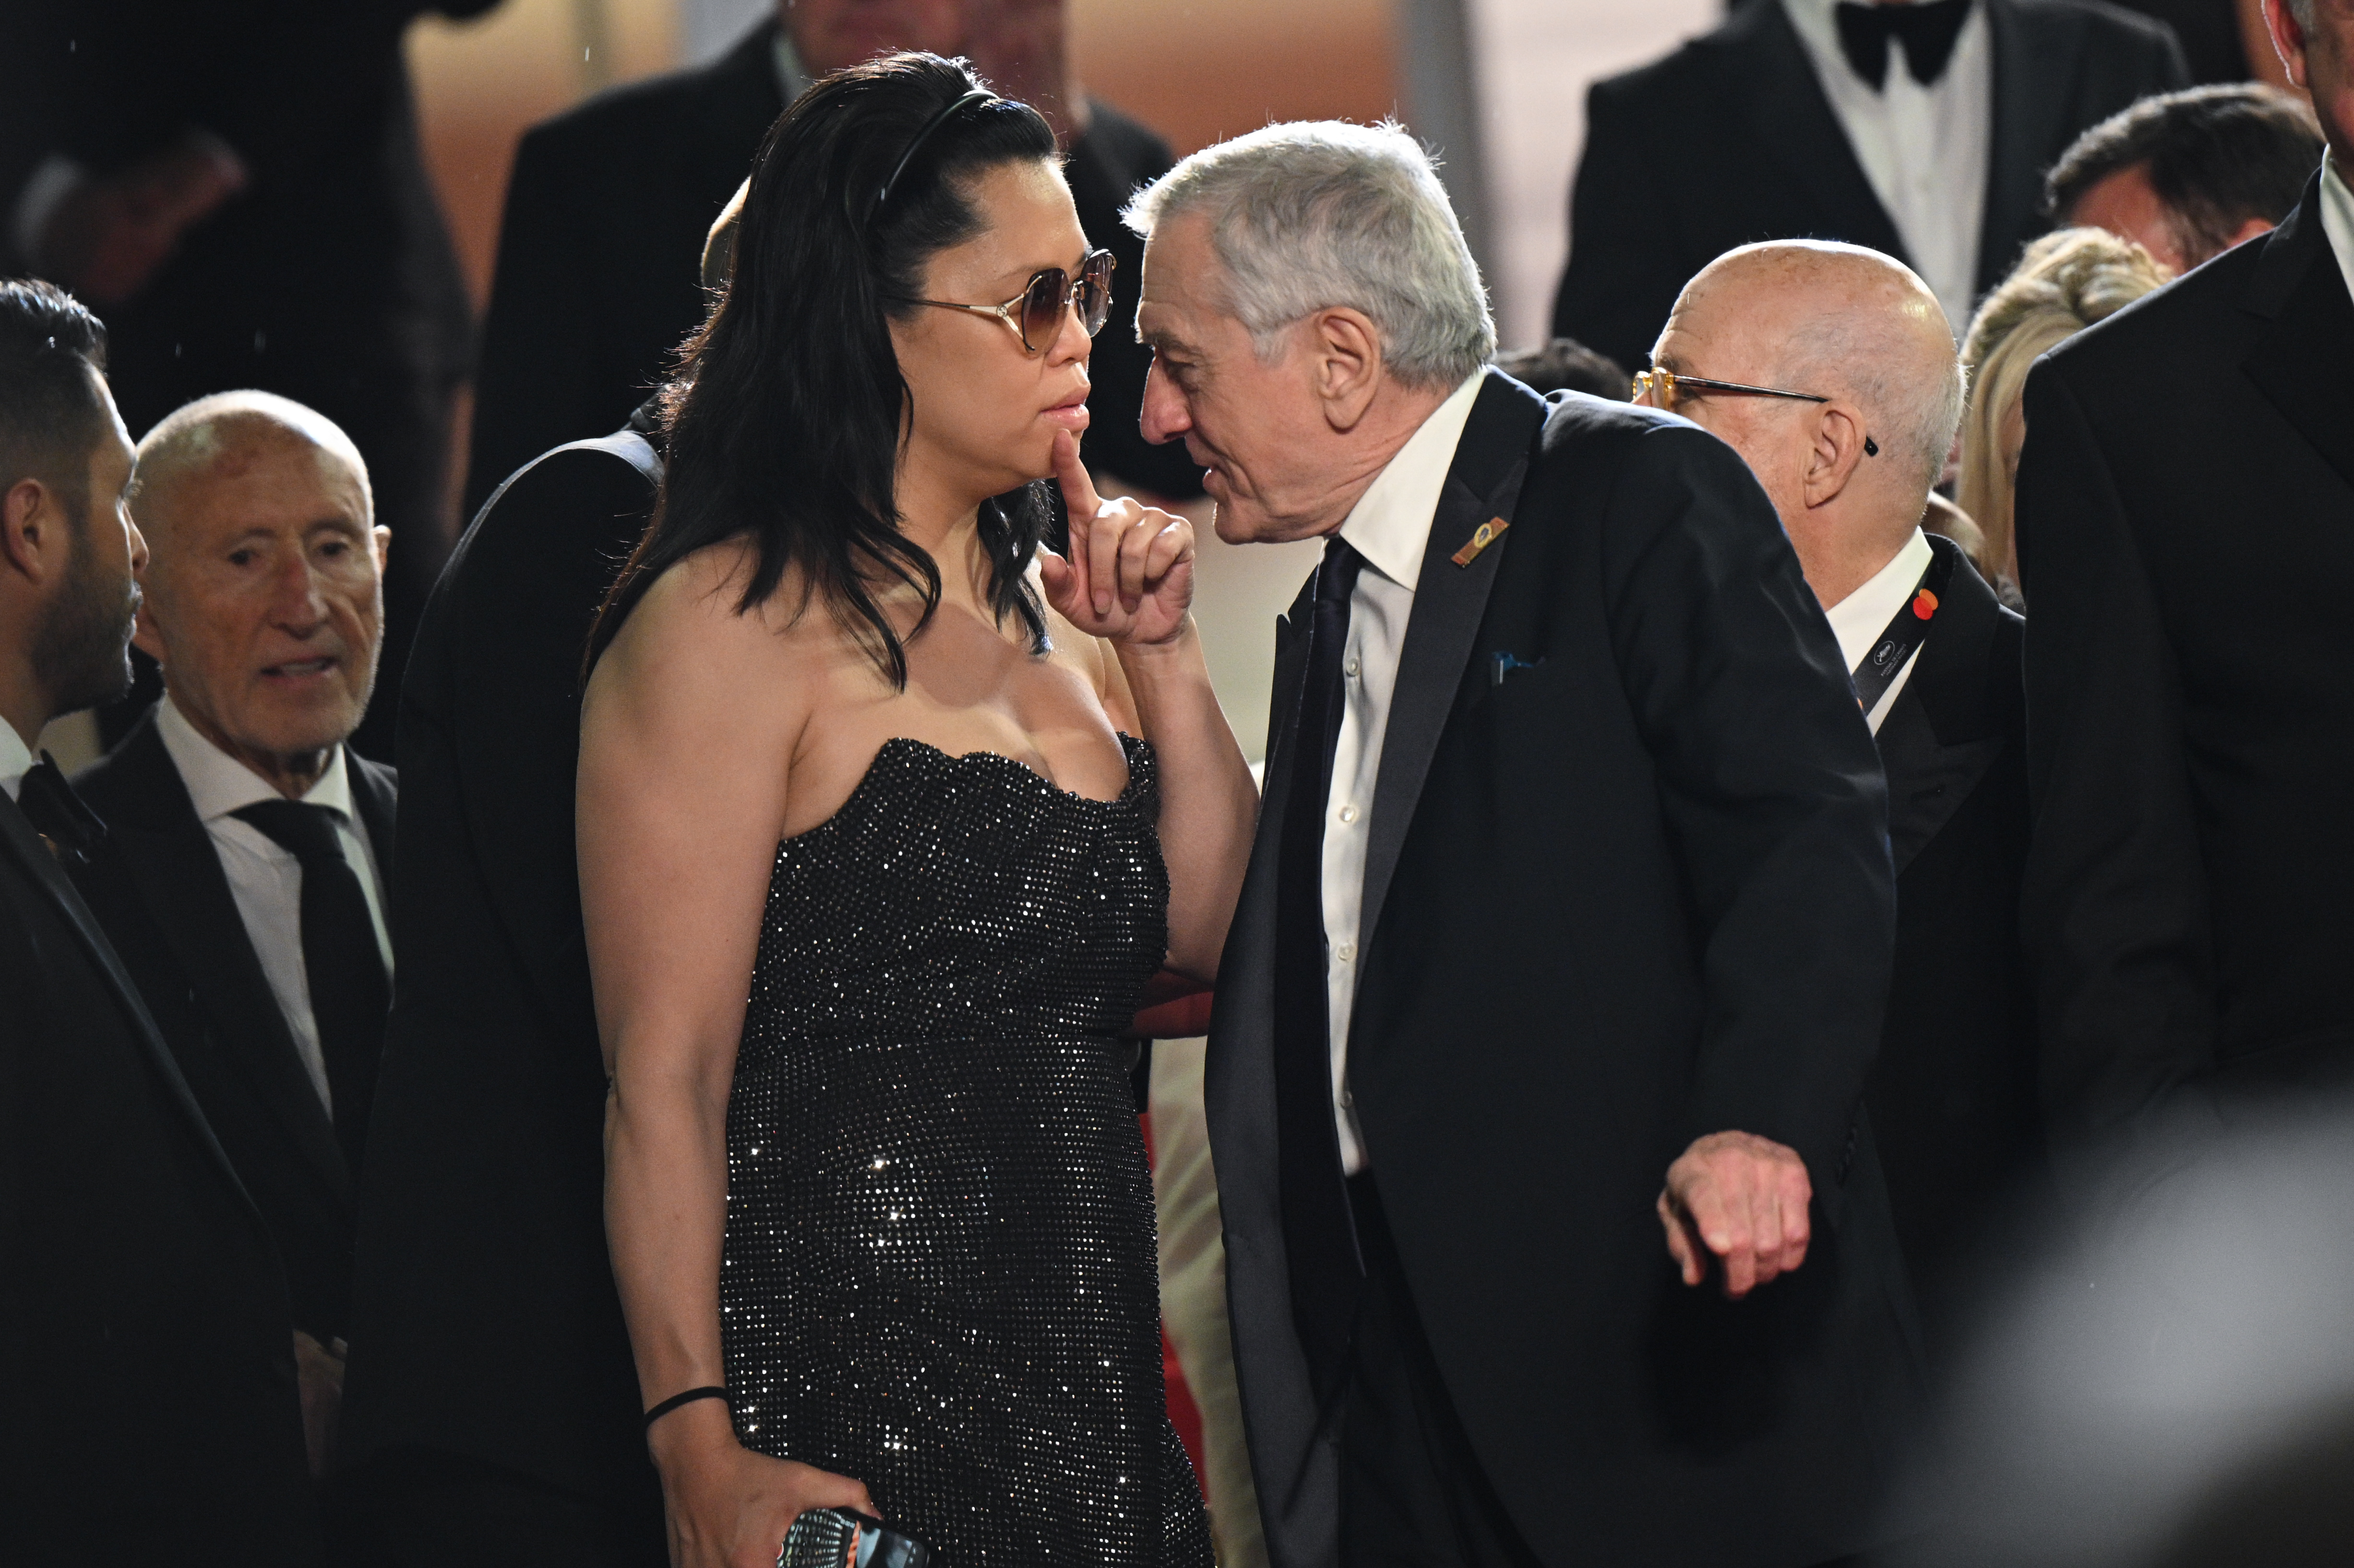 Tiffany Chen and Robert De Niro in Cannes, France on May 20, 2023 | Source: Getty Images